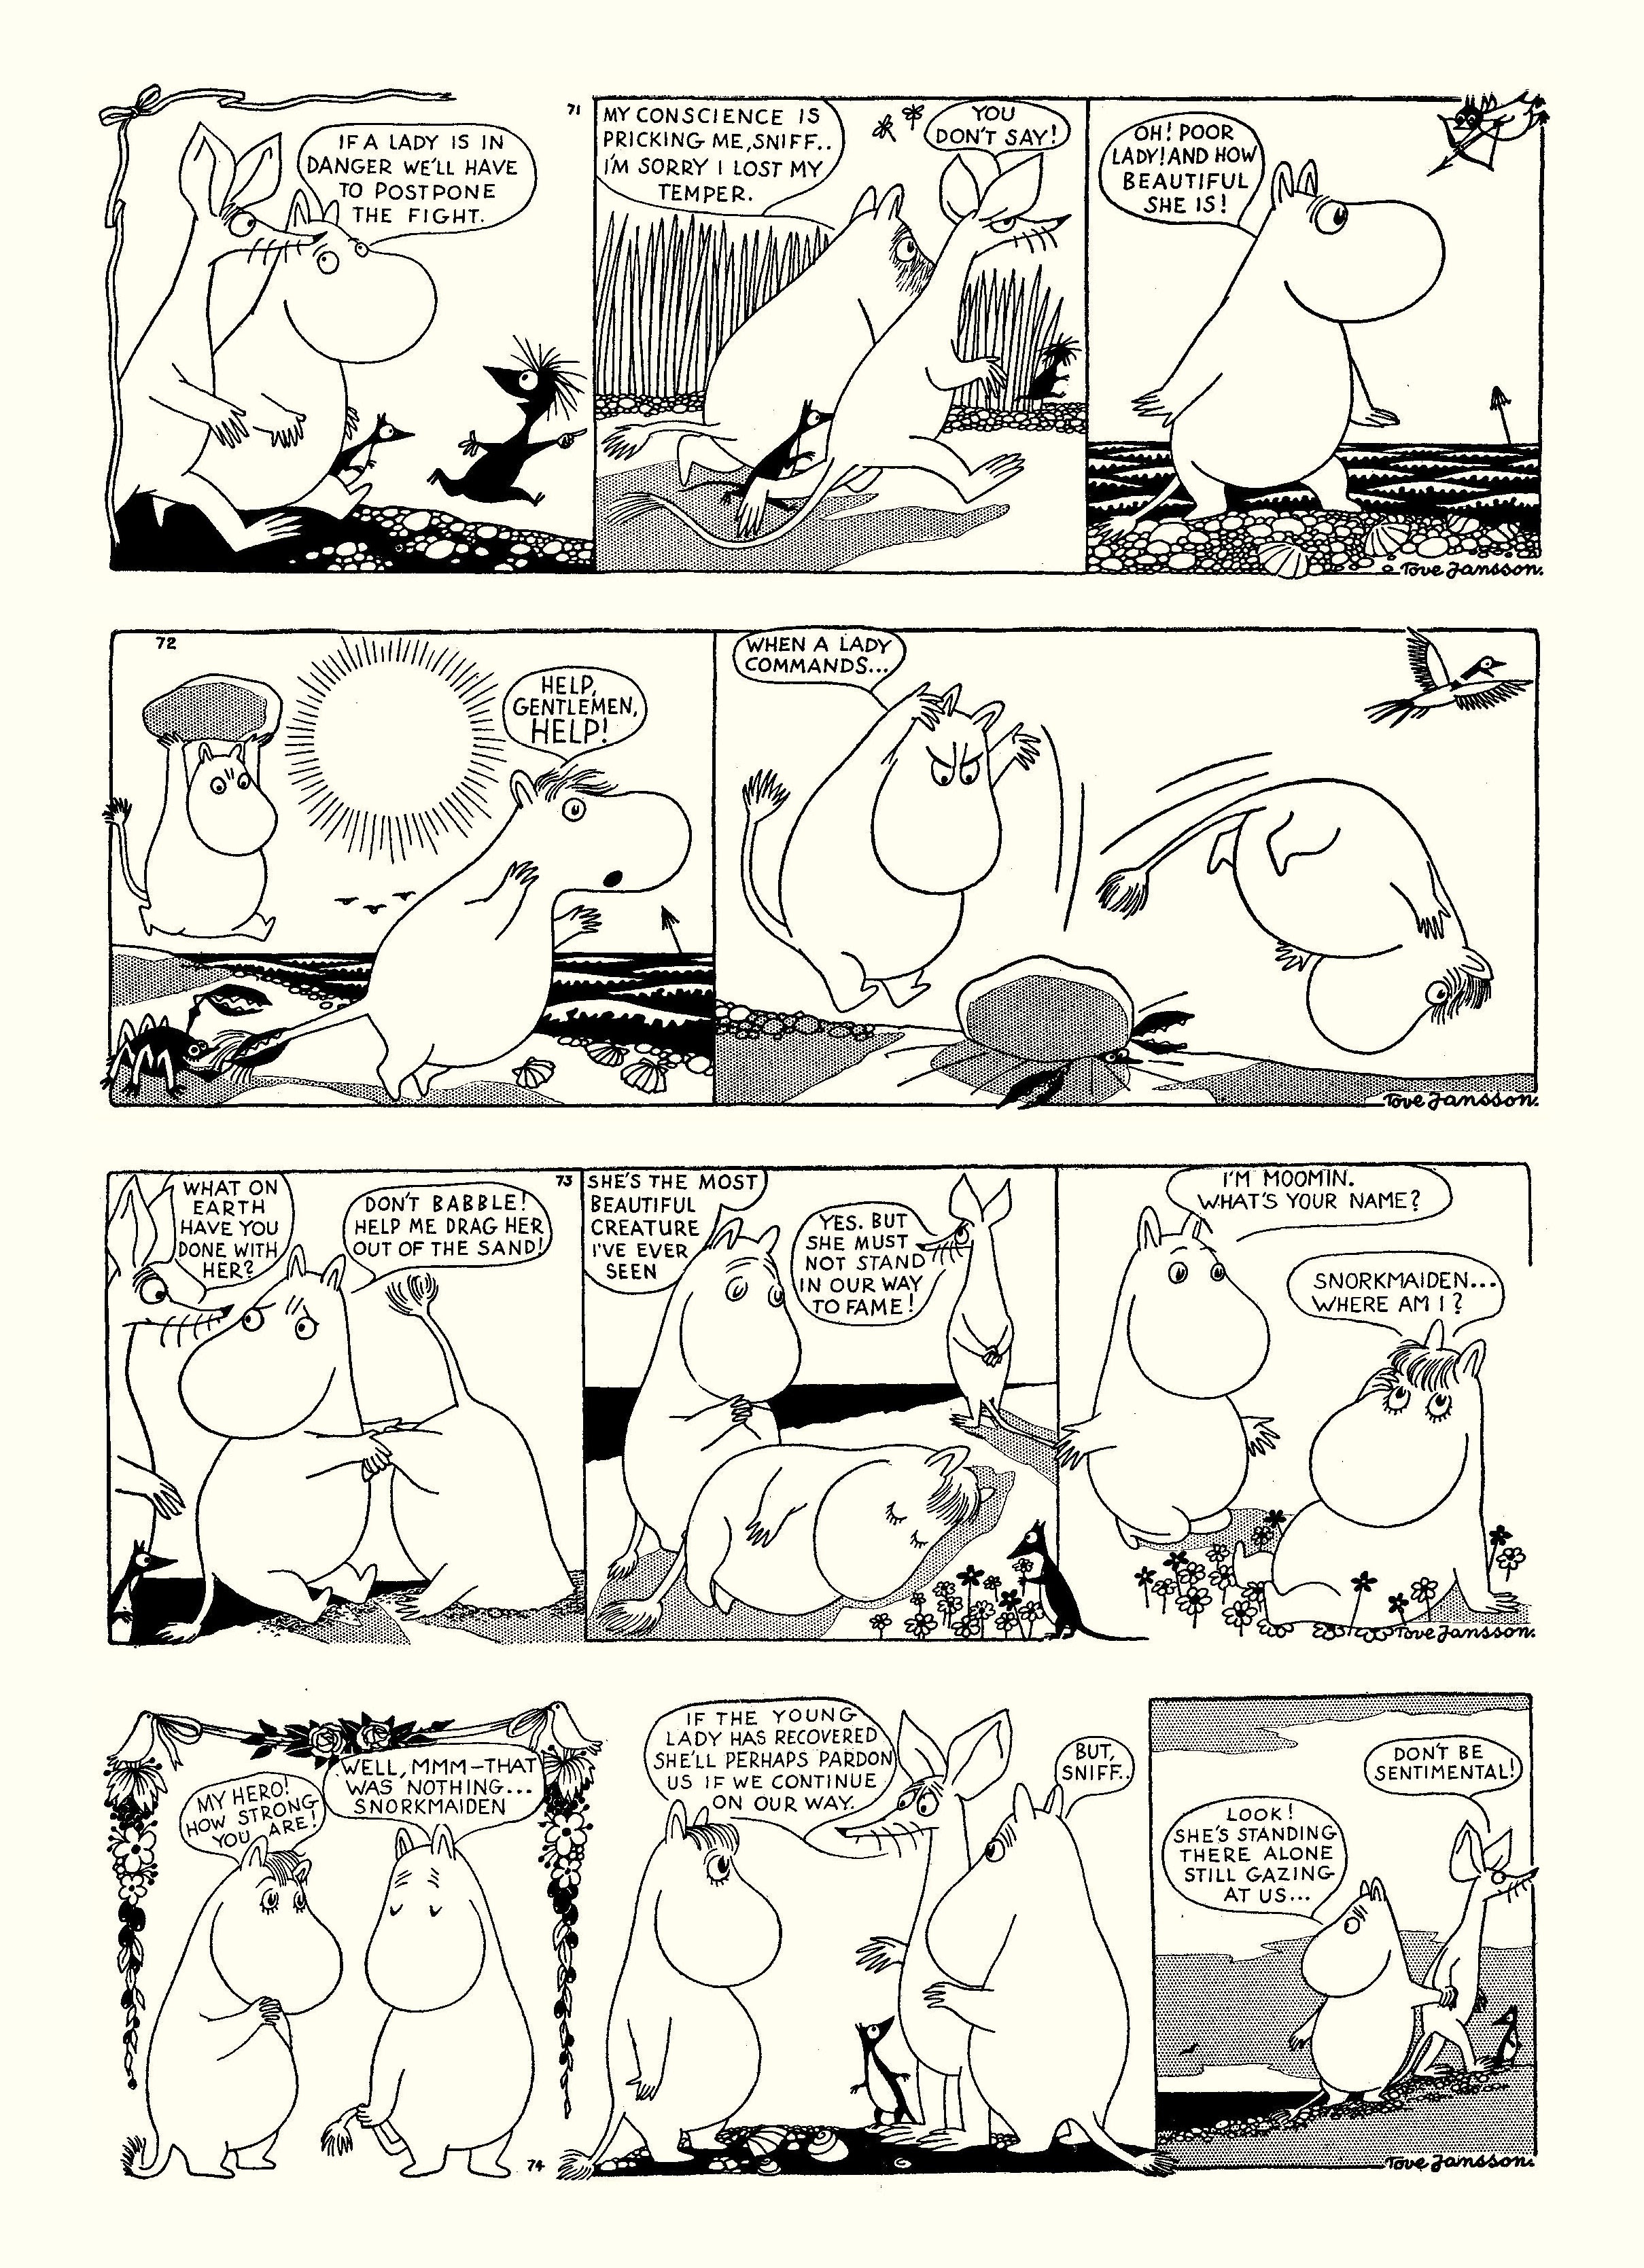 Read online Moomin: The Complete Tove Jansson Comic Strip comic -  Issue # TPB 1 - 24